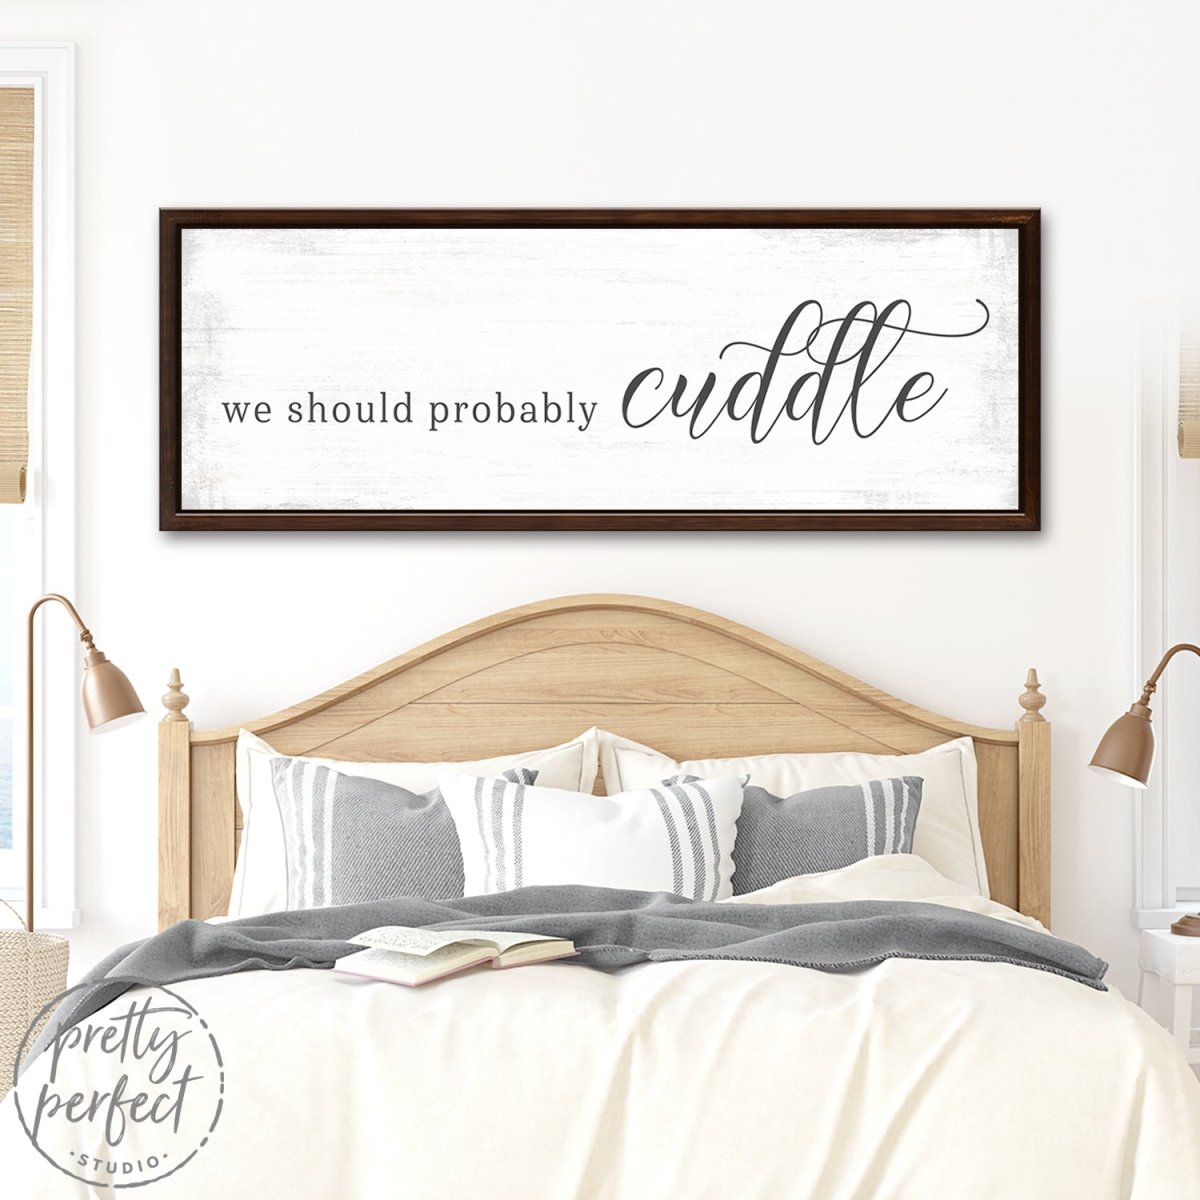 We Should Probably Cuddle Sign Above Bed - Pretty Perfect Studio